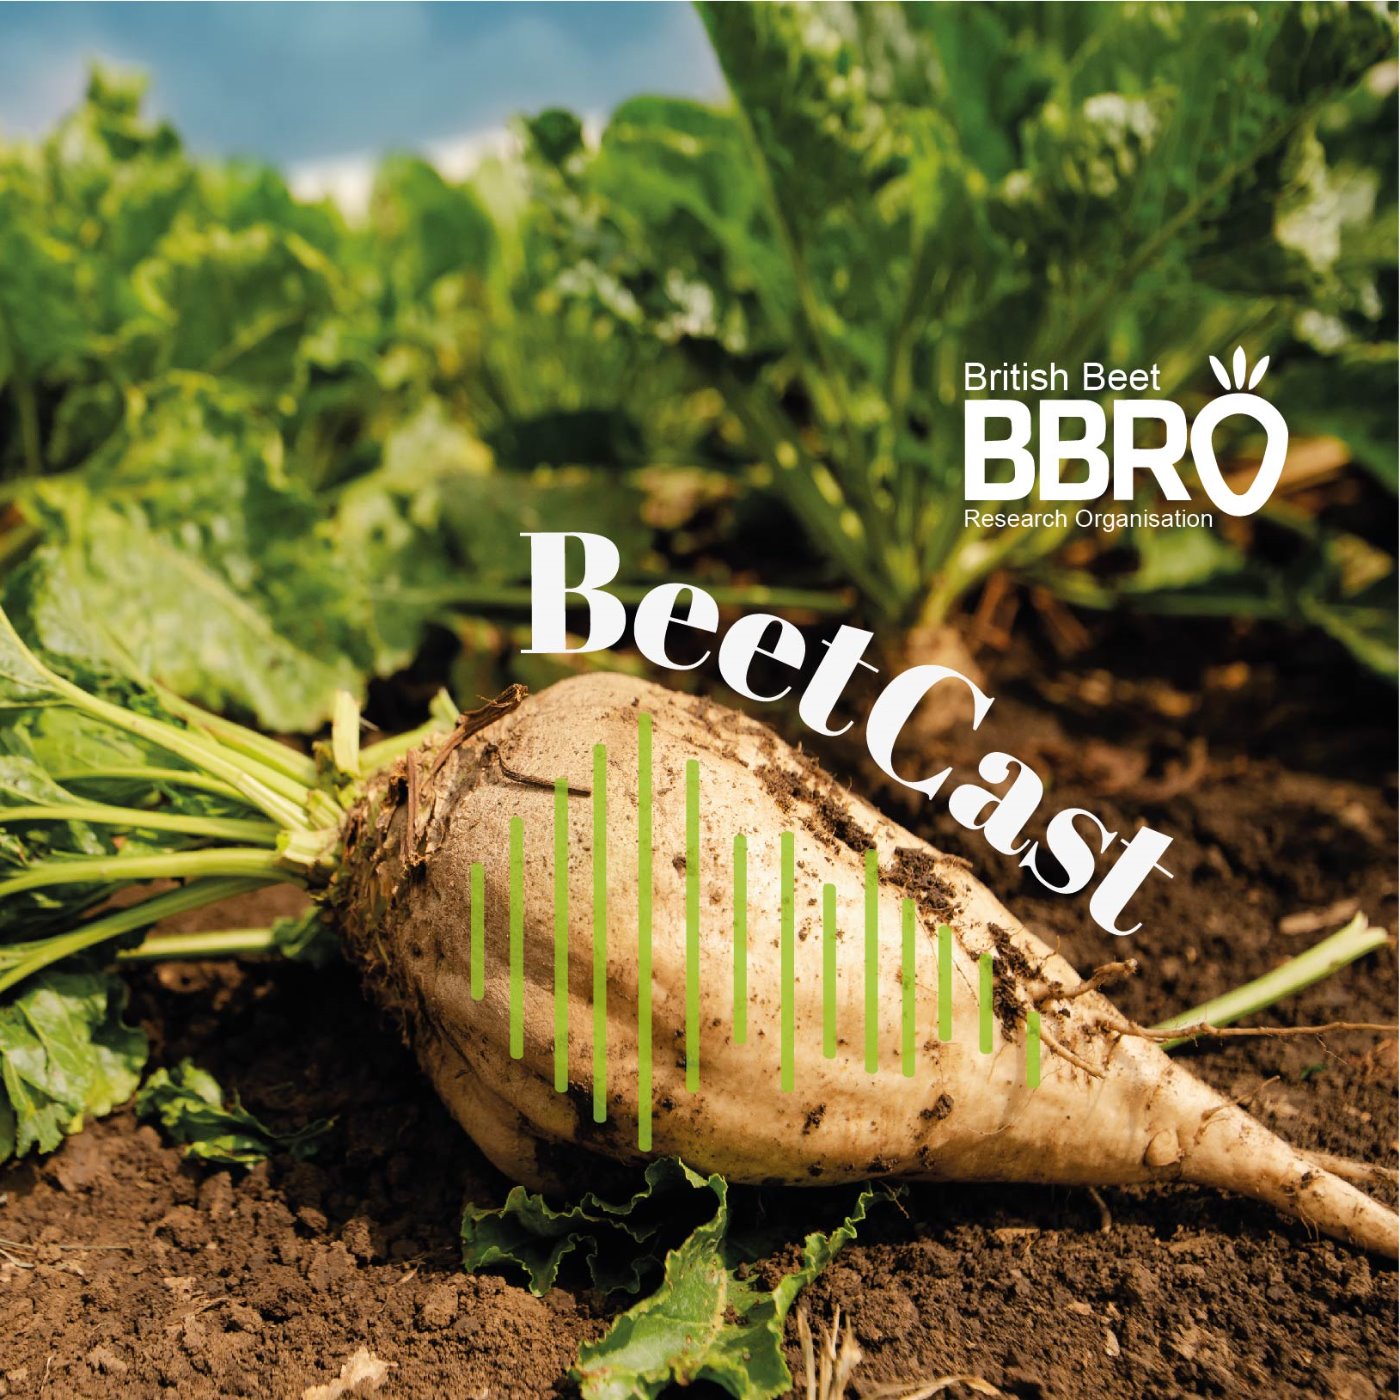 BeetCast August: Making the most of final canopy growth.